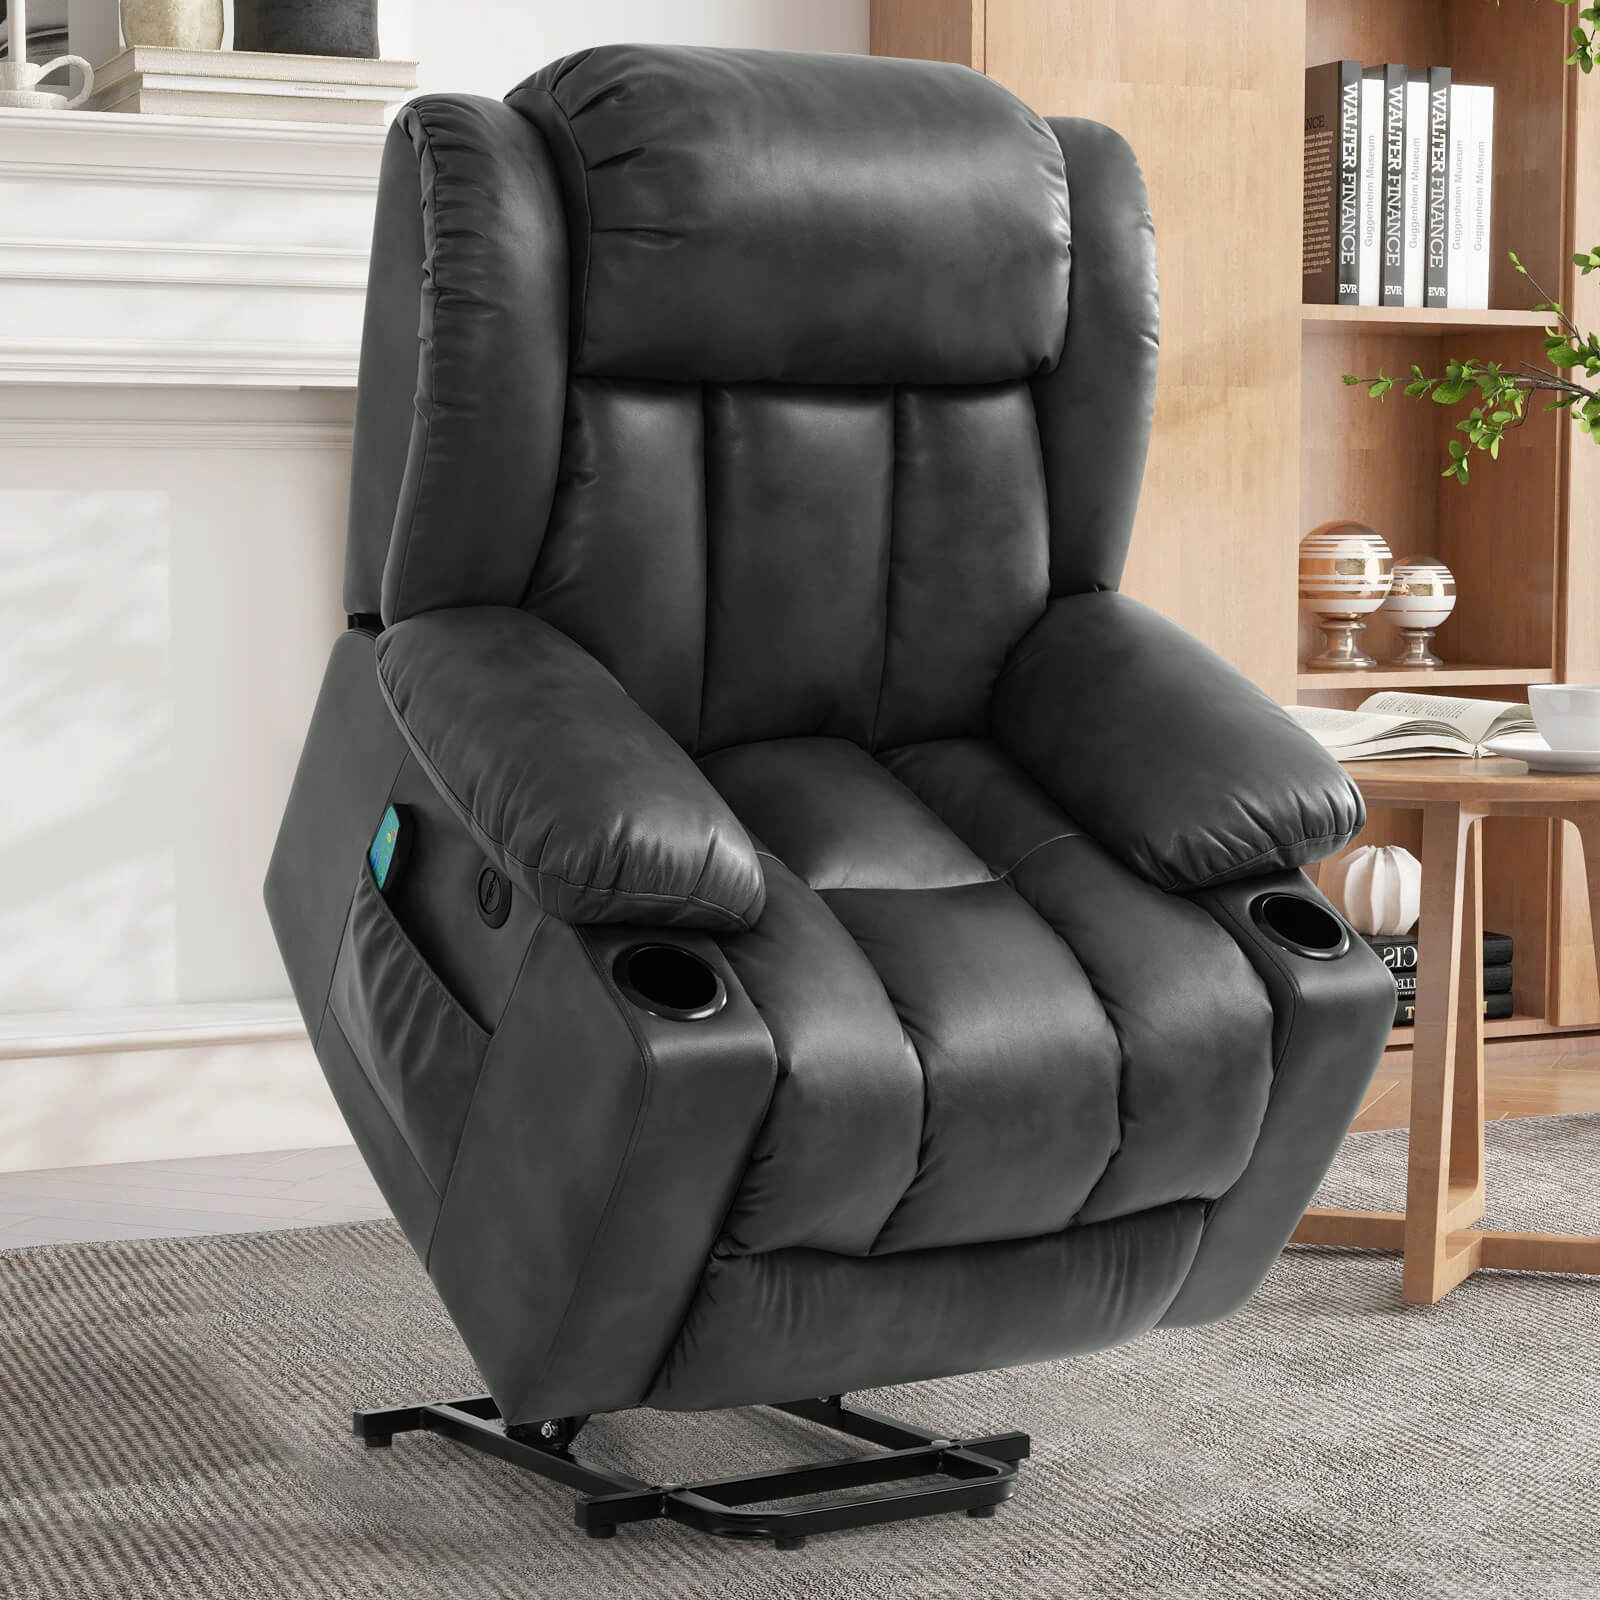 Soulout Luxury Lift Chair Recliner with Heat and Massage Grey